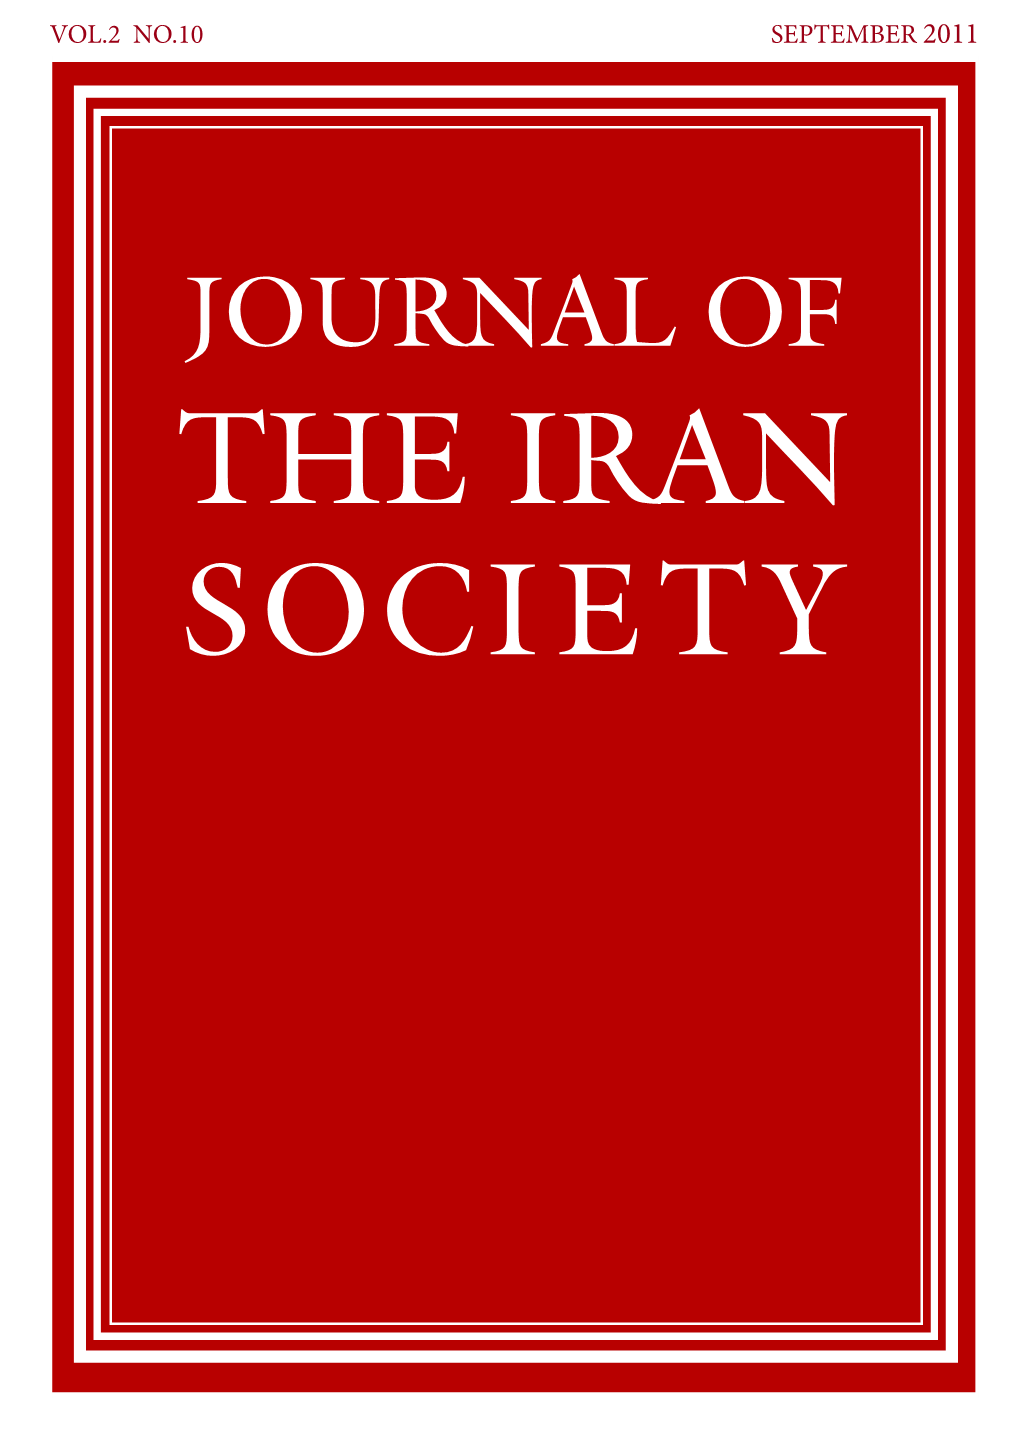 Download the 2011 Journal